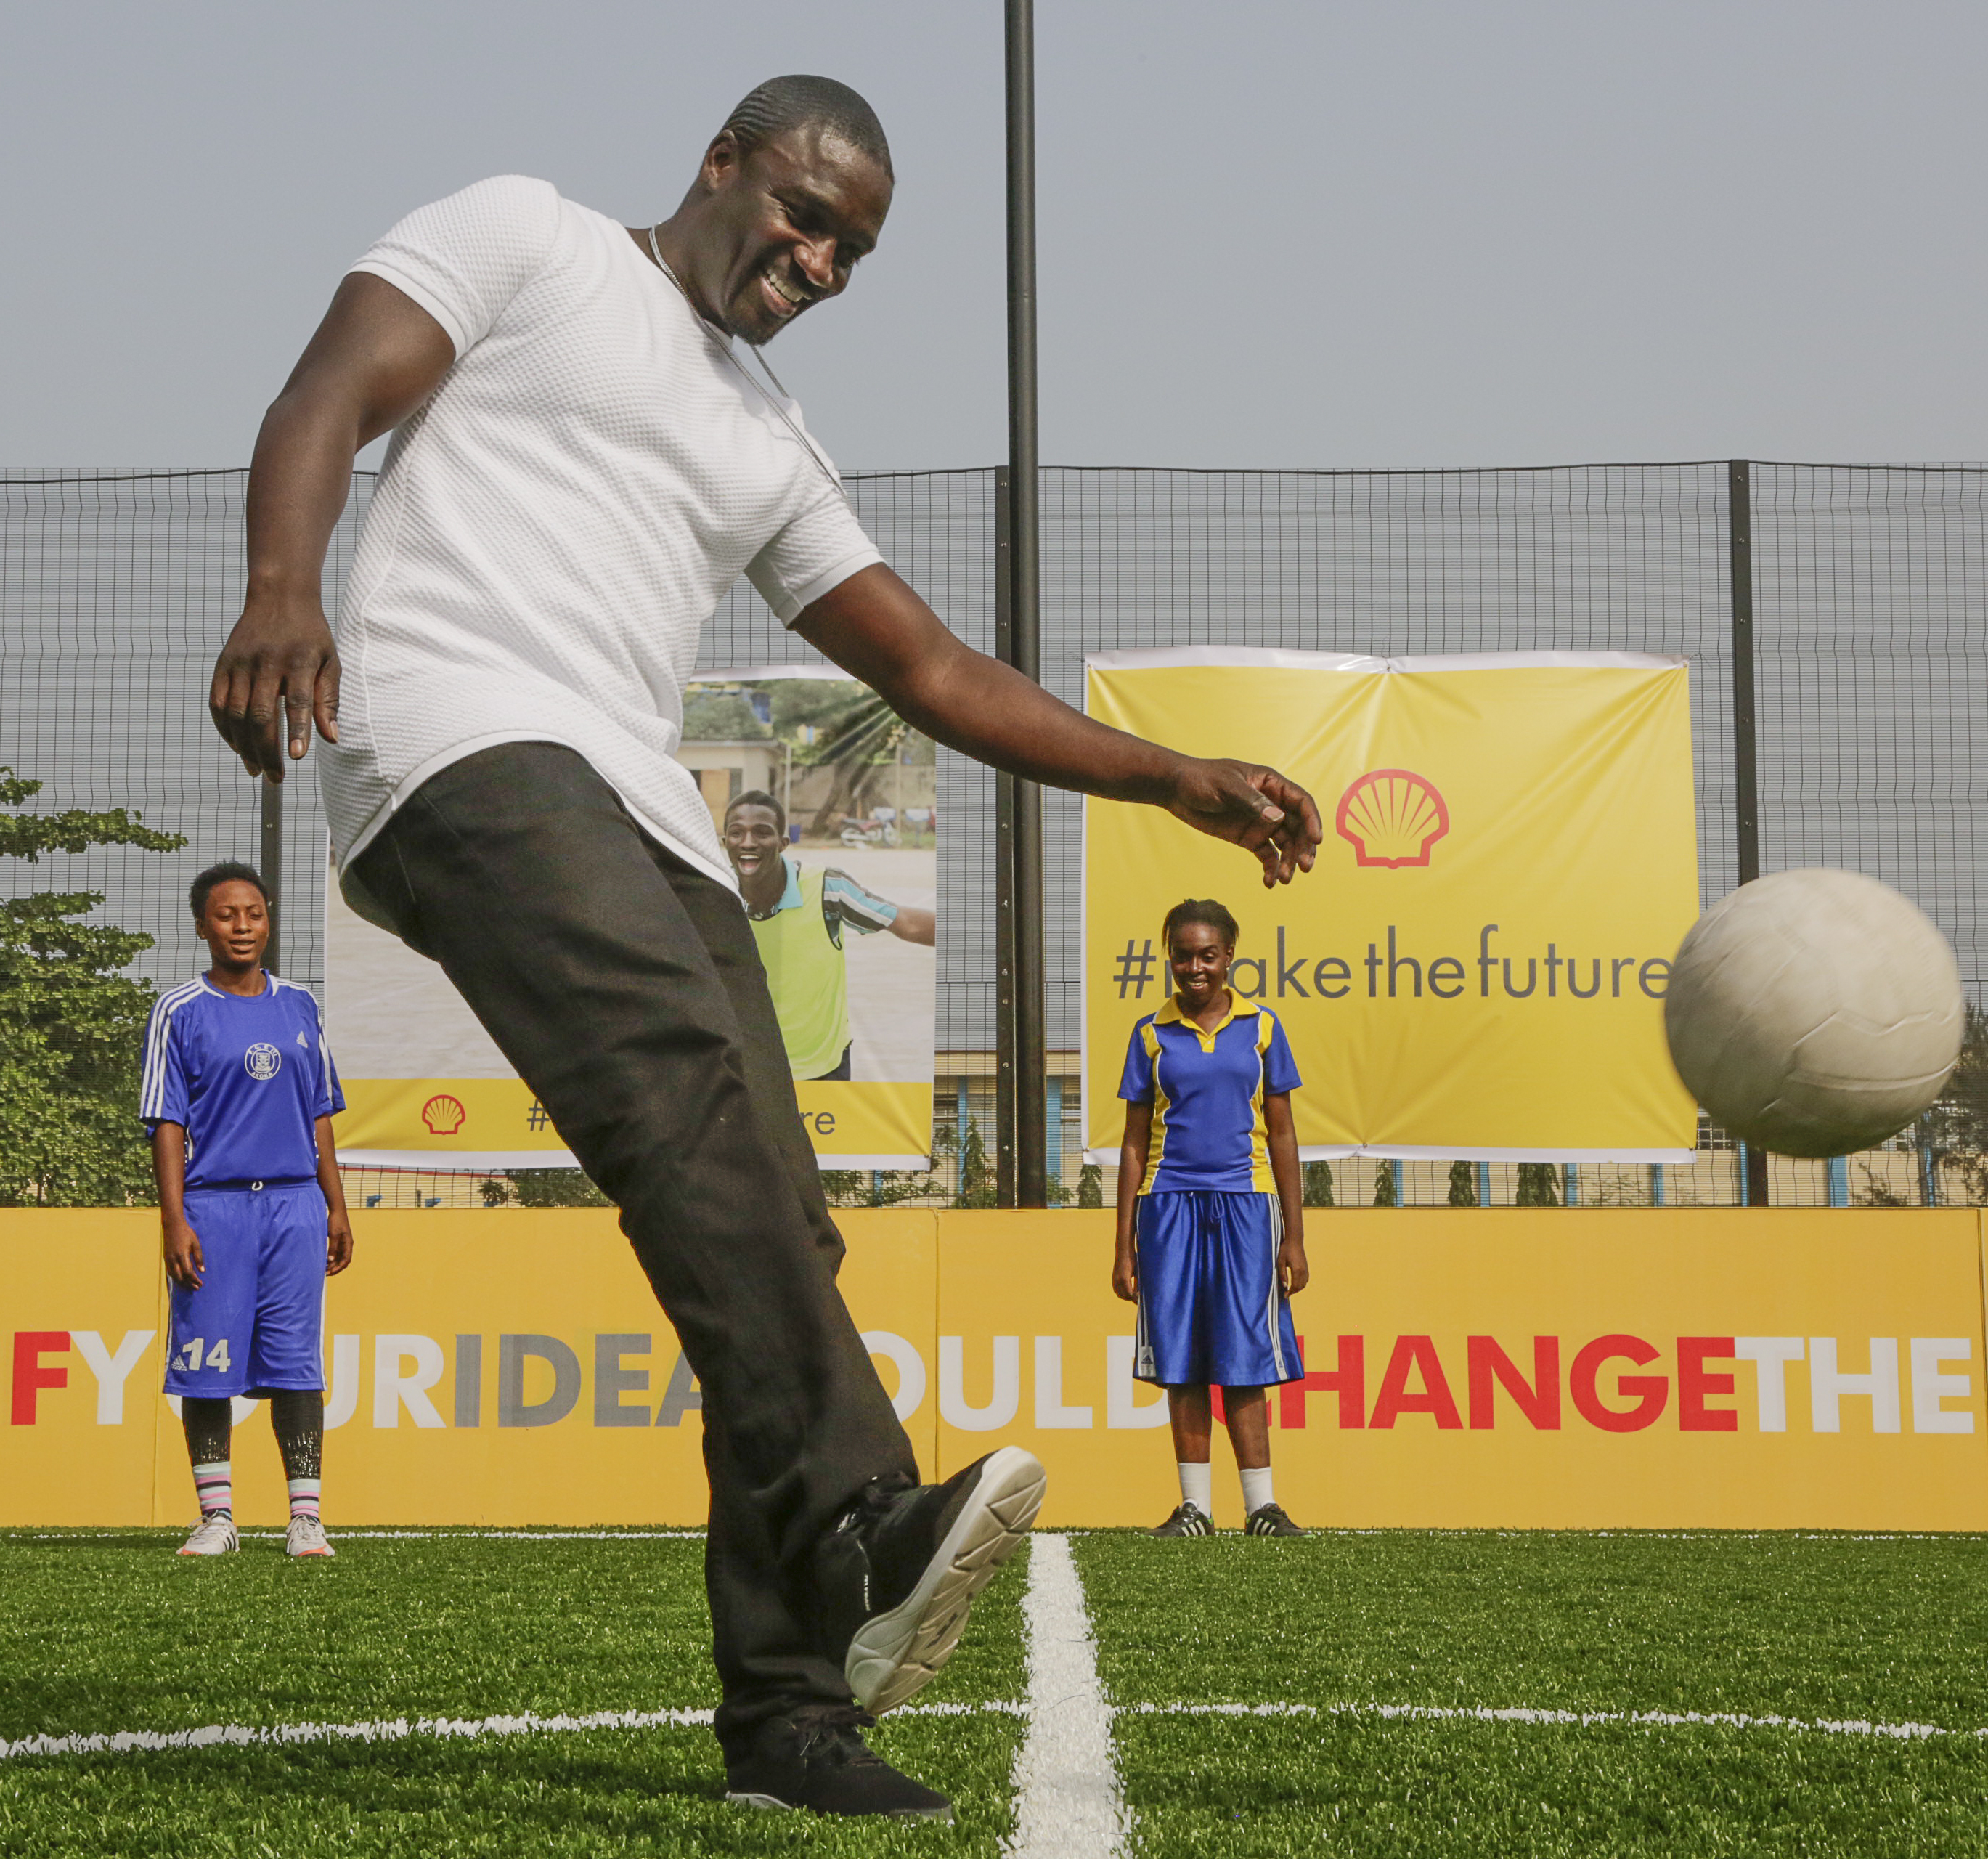 Shell collaborates with Akon, unveil Africa’s first player, solar powered football pitch in Lagos